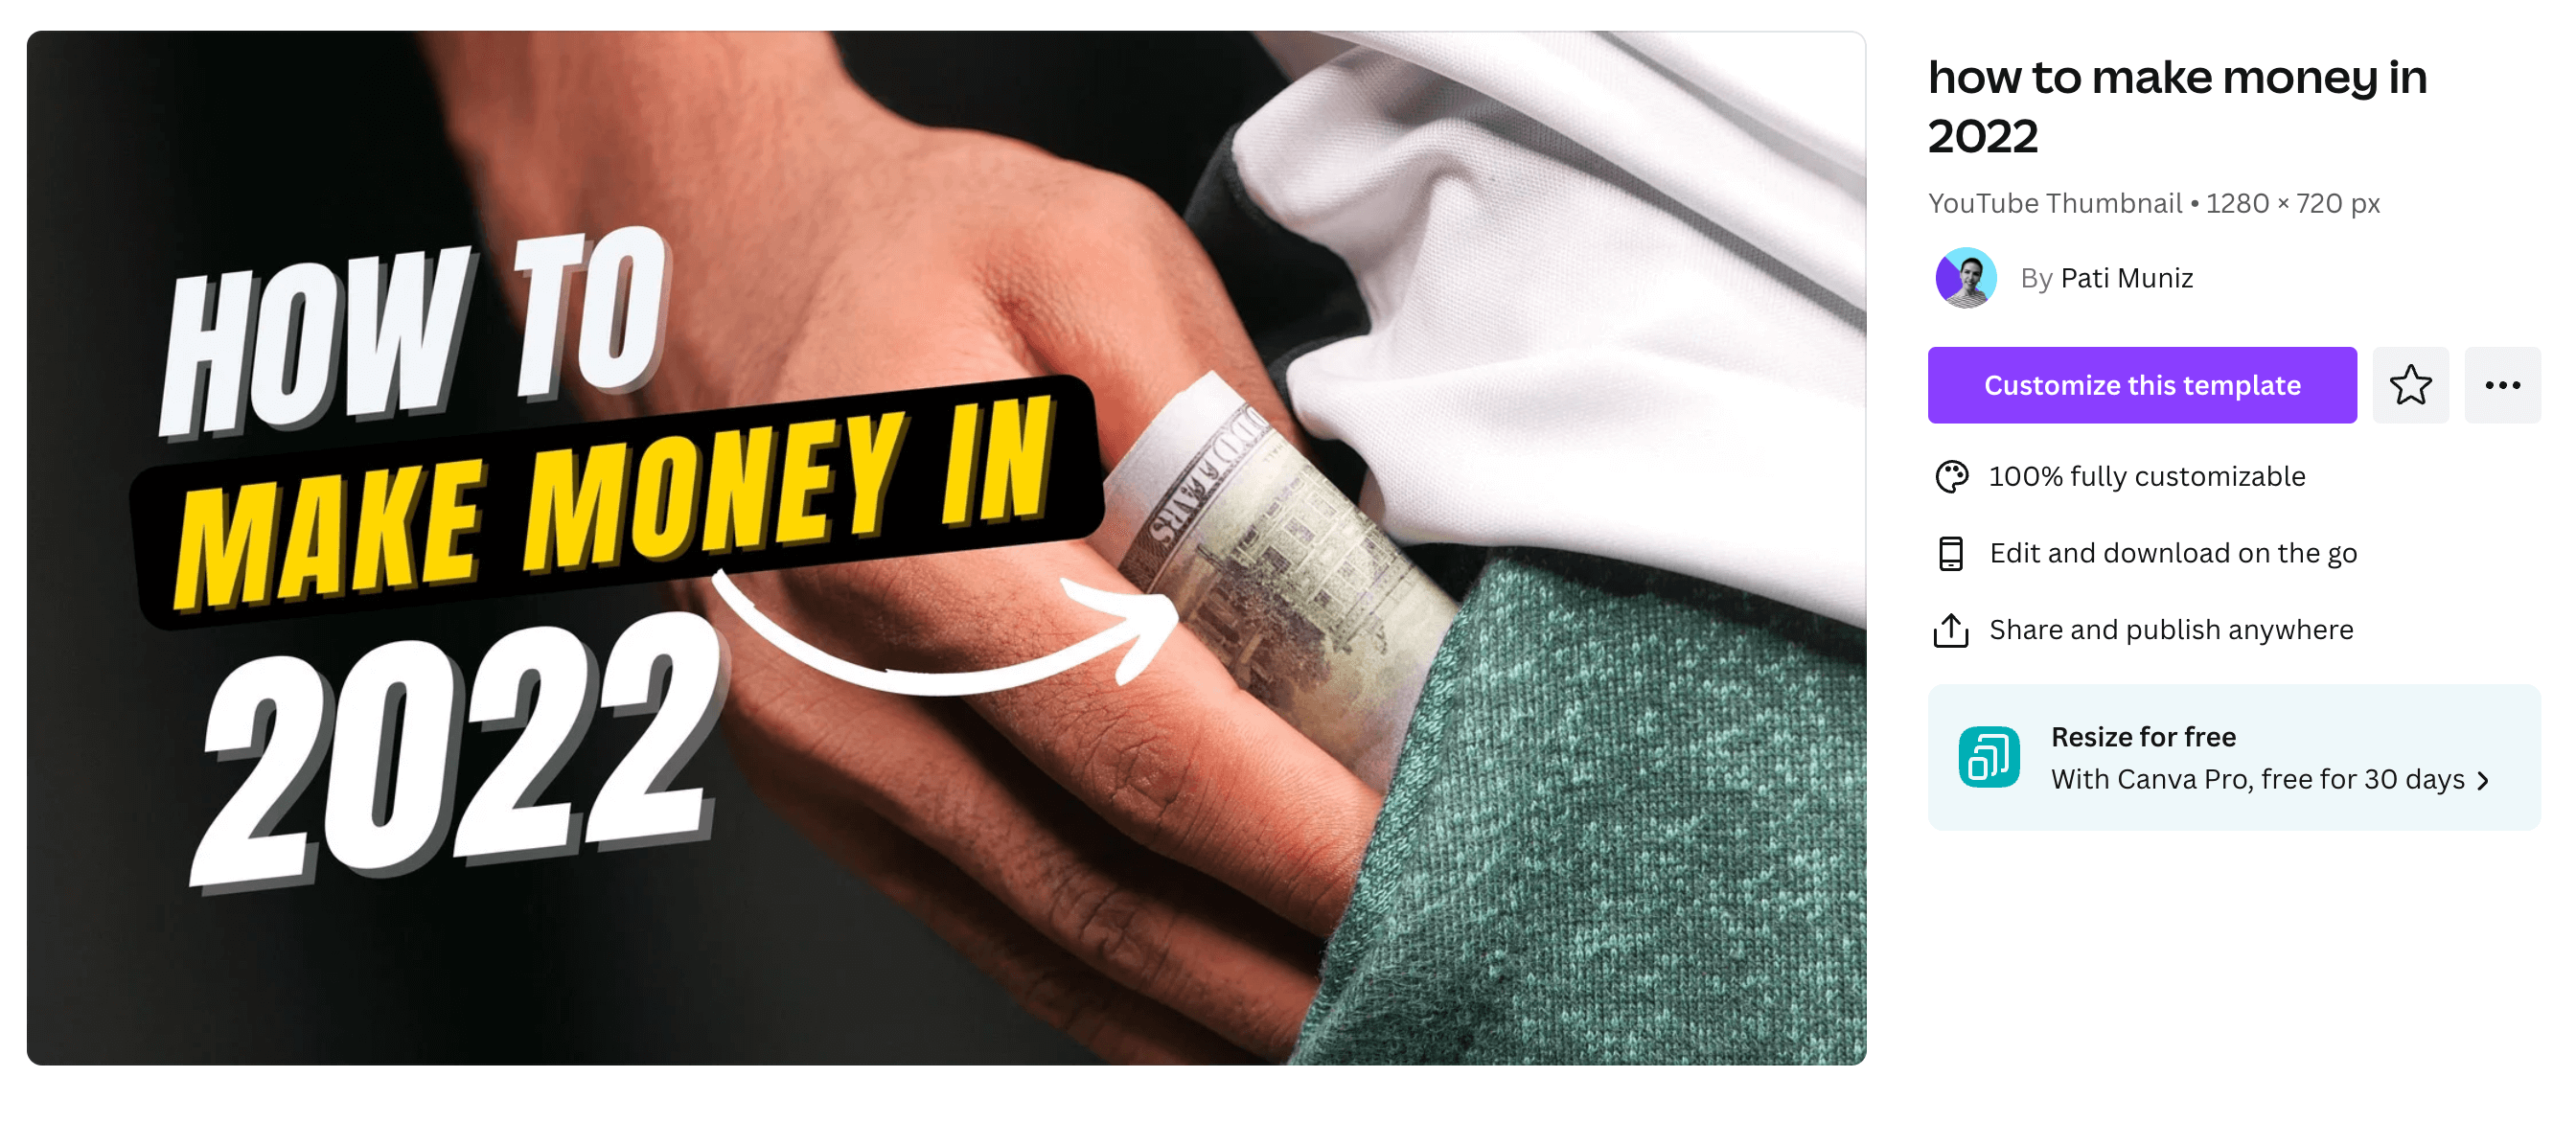 A YouTube Thumbnail with a picture on a person putting cash in their pocket and text that reads "How to Make Money in 2022"